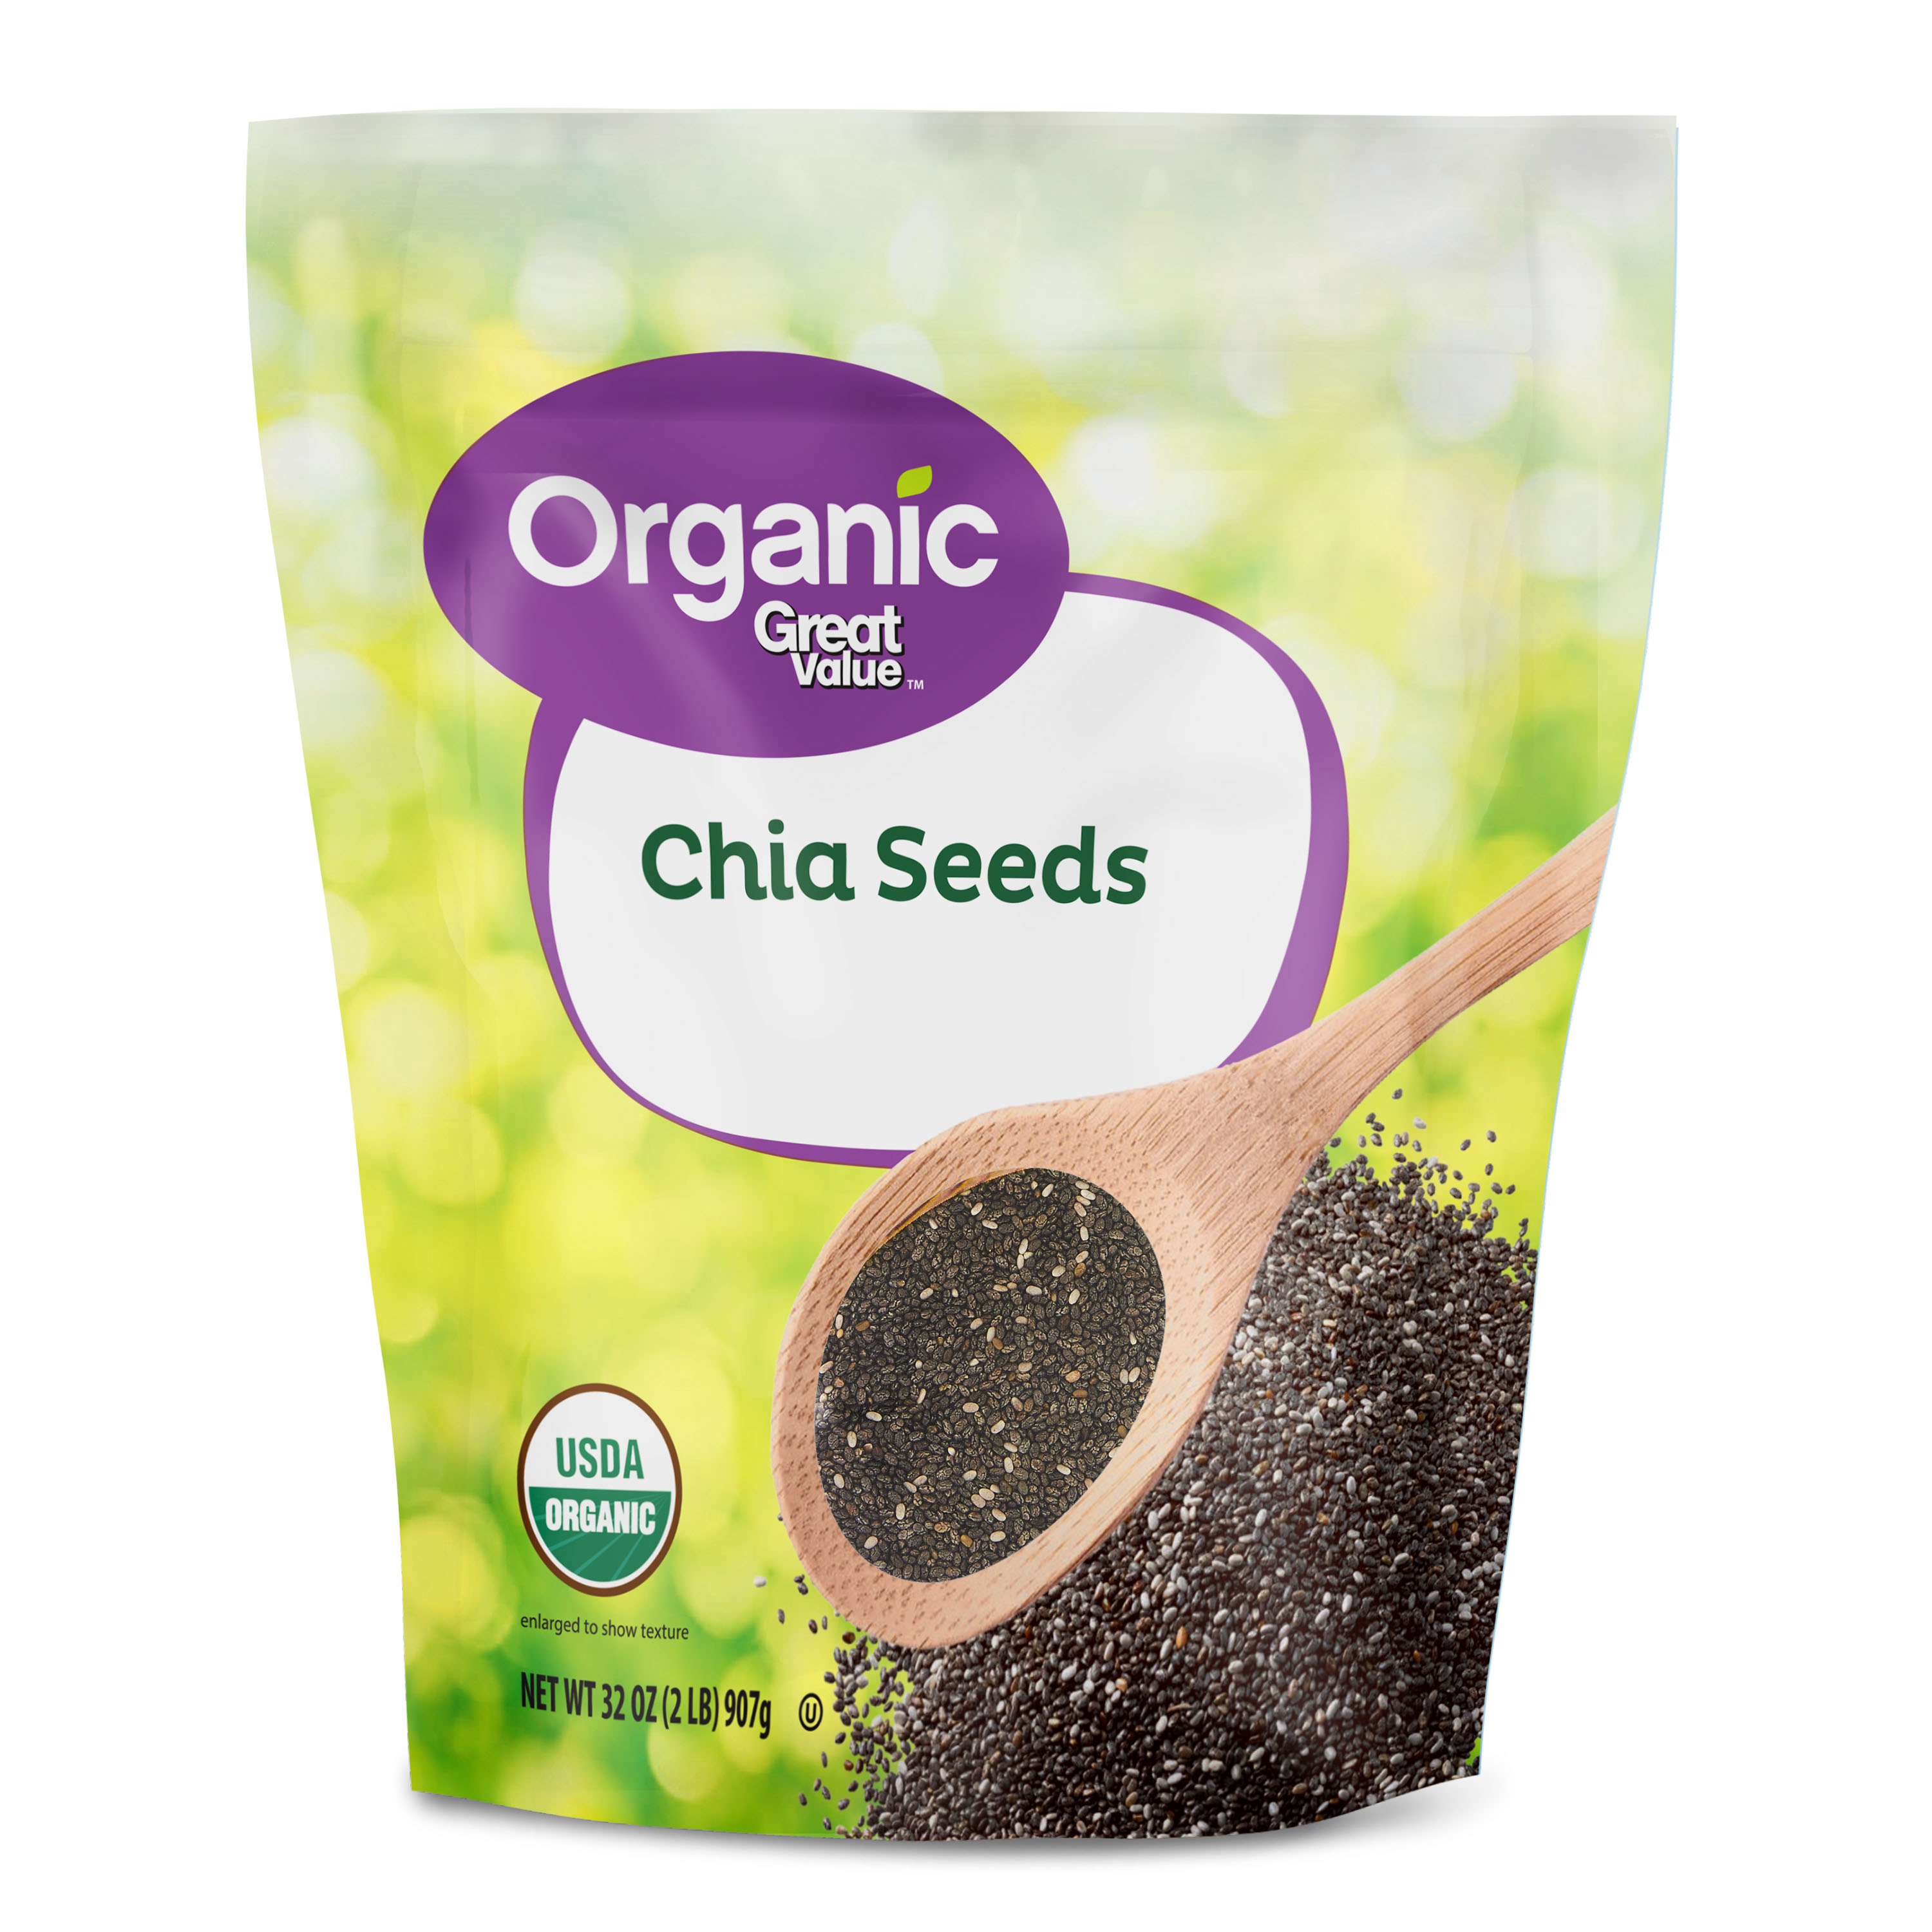 Great Value Organic Chia Seeds, 32 oz - image 1 of 7